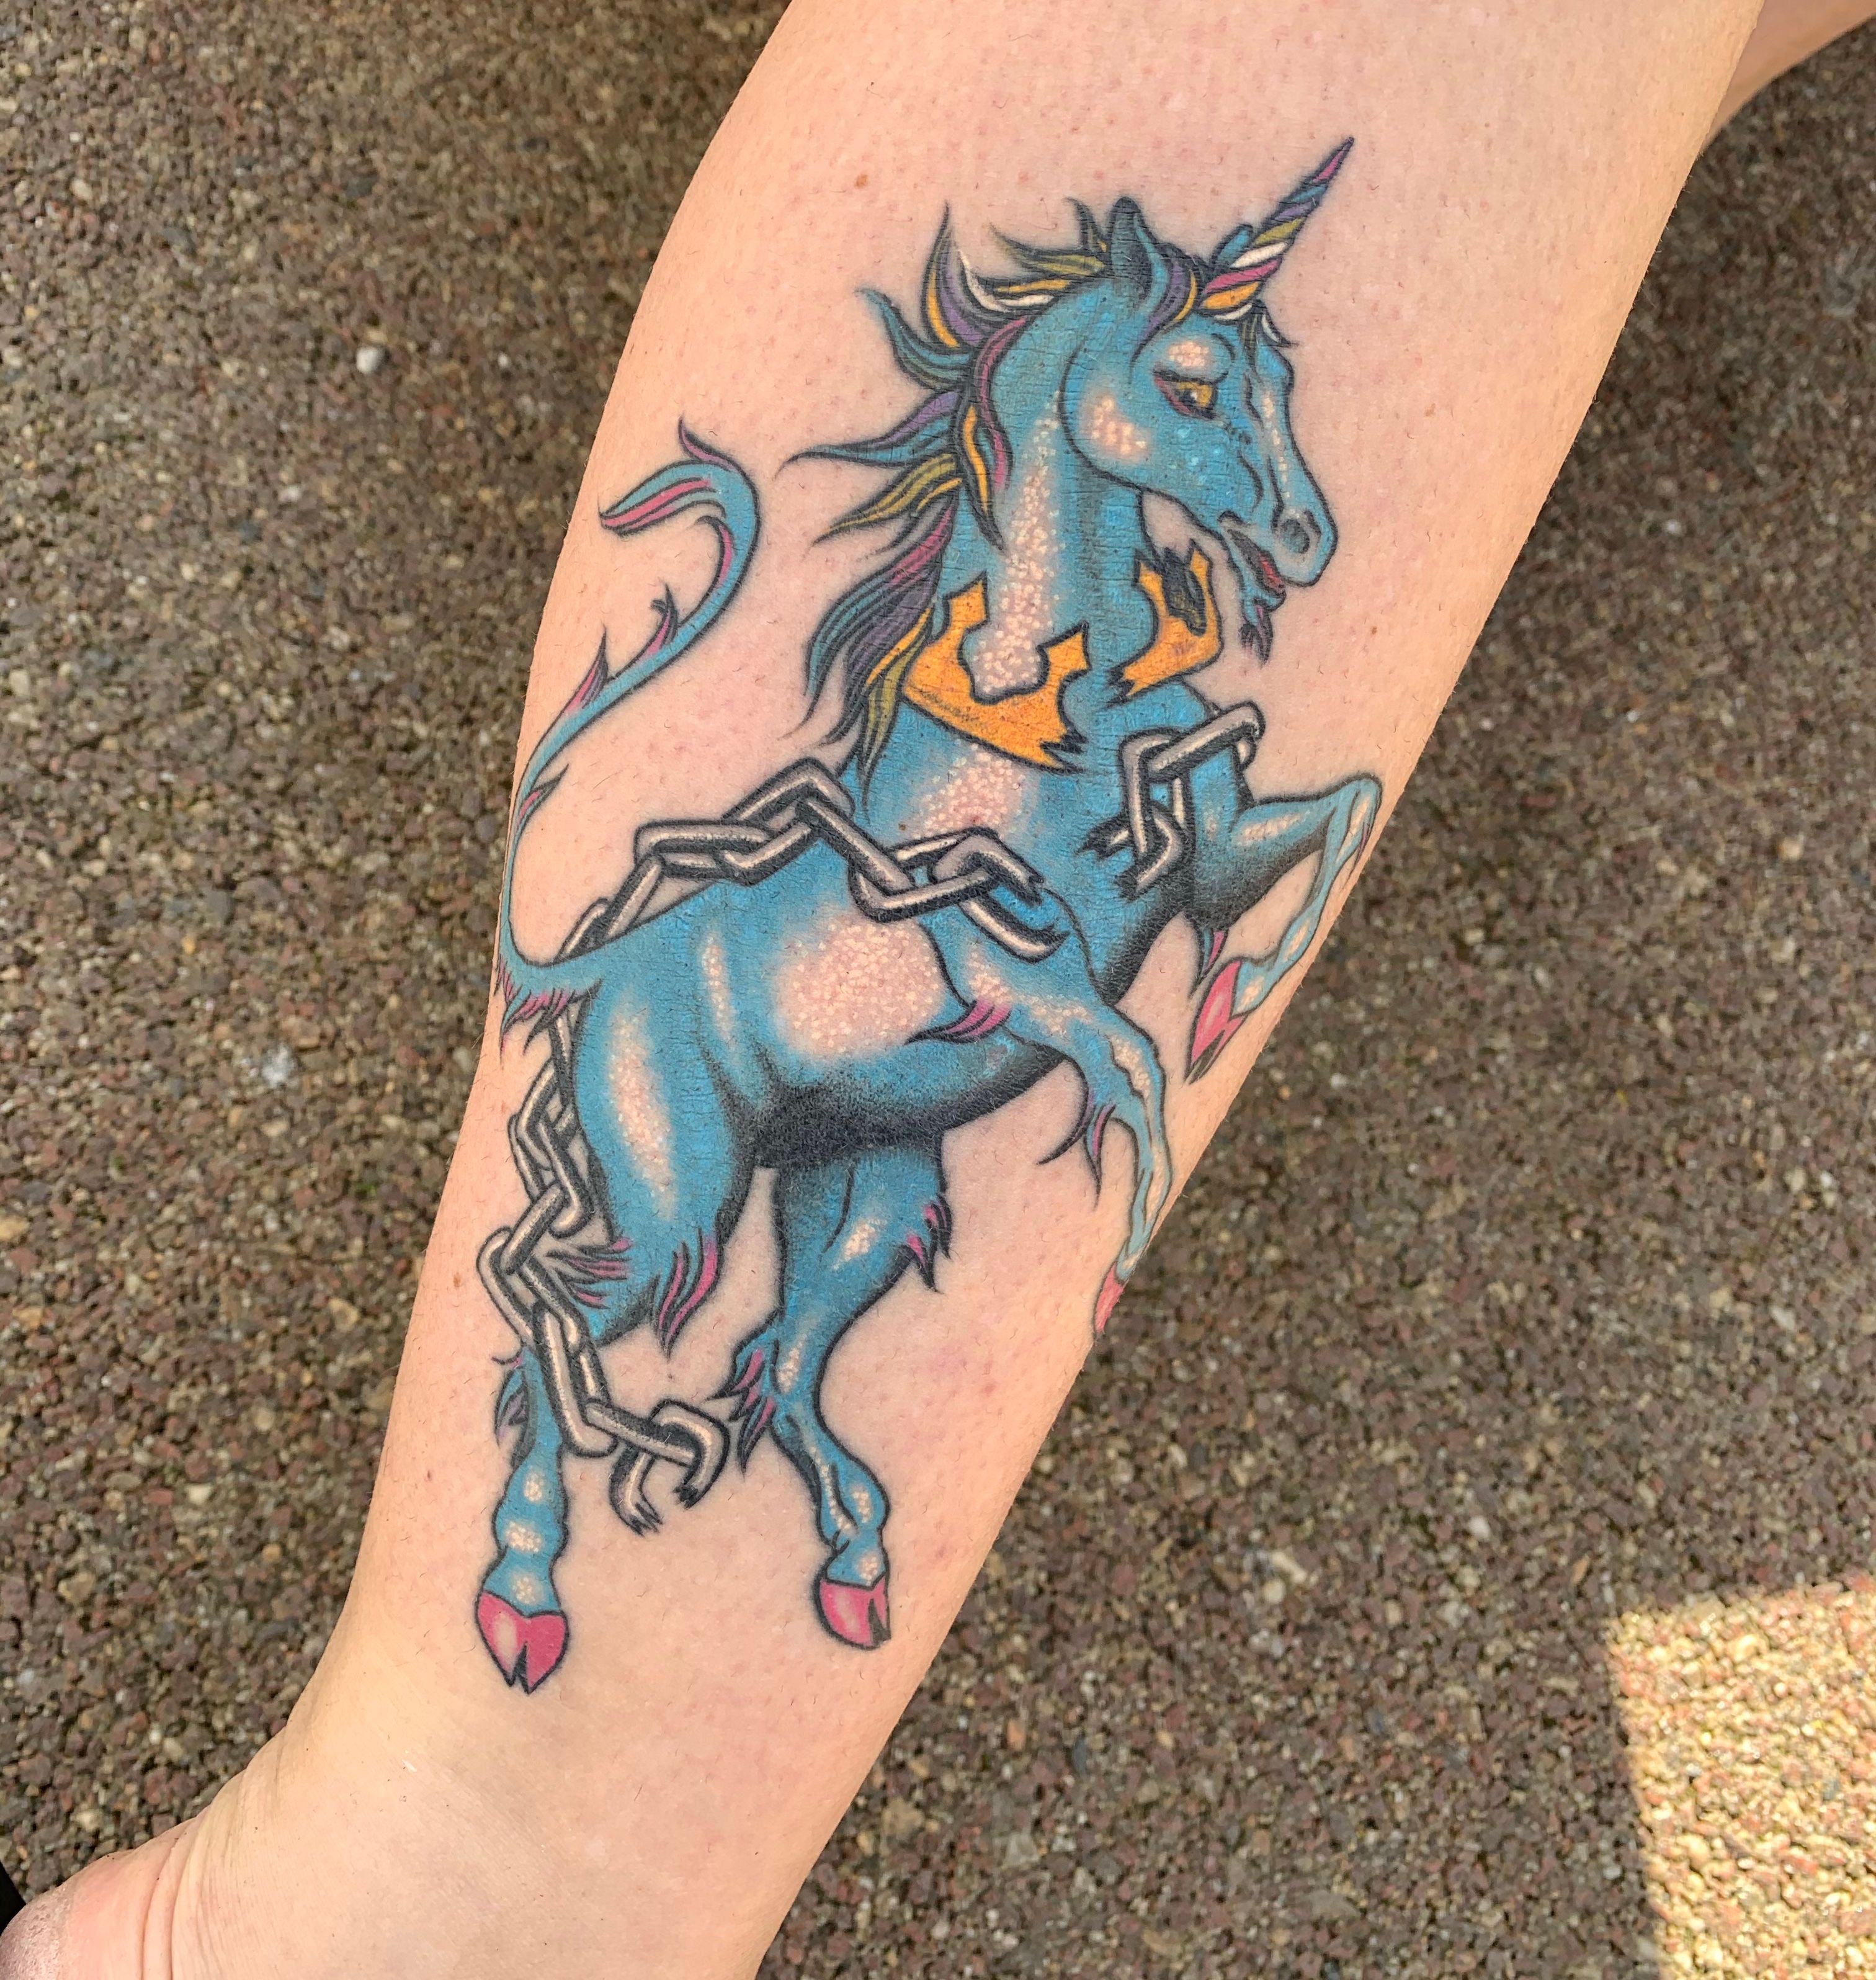 Unicorn tattoo by Sol Amstutz at Dreams Collide Tattoo in Lancaster, PA  #evamigtattoos #tattoo - Imageix